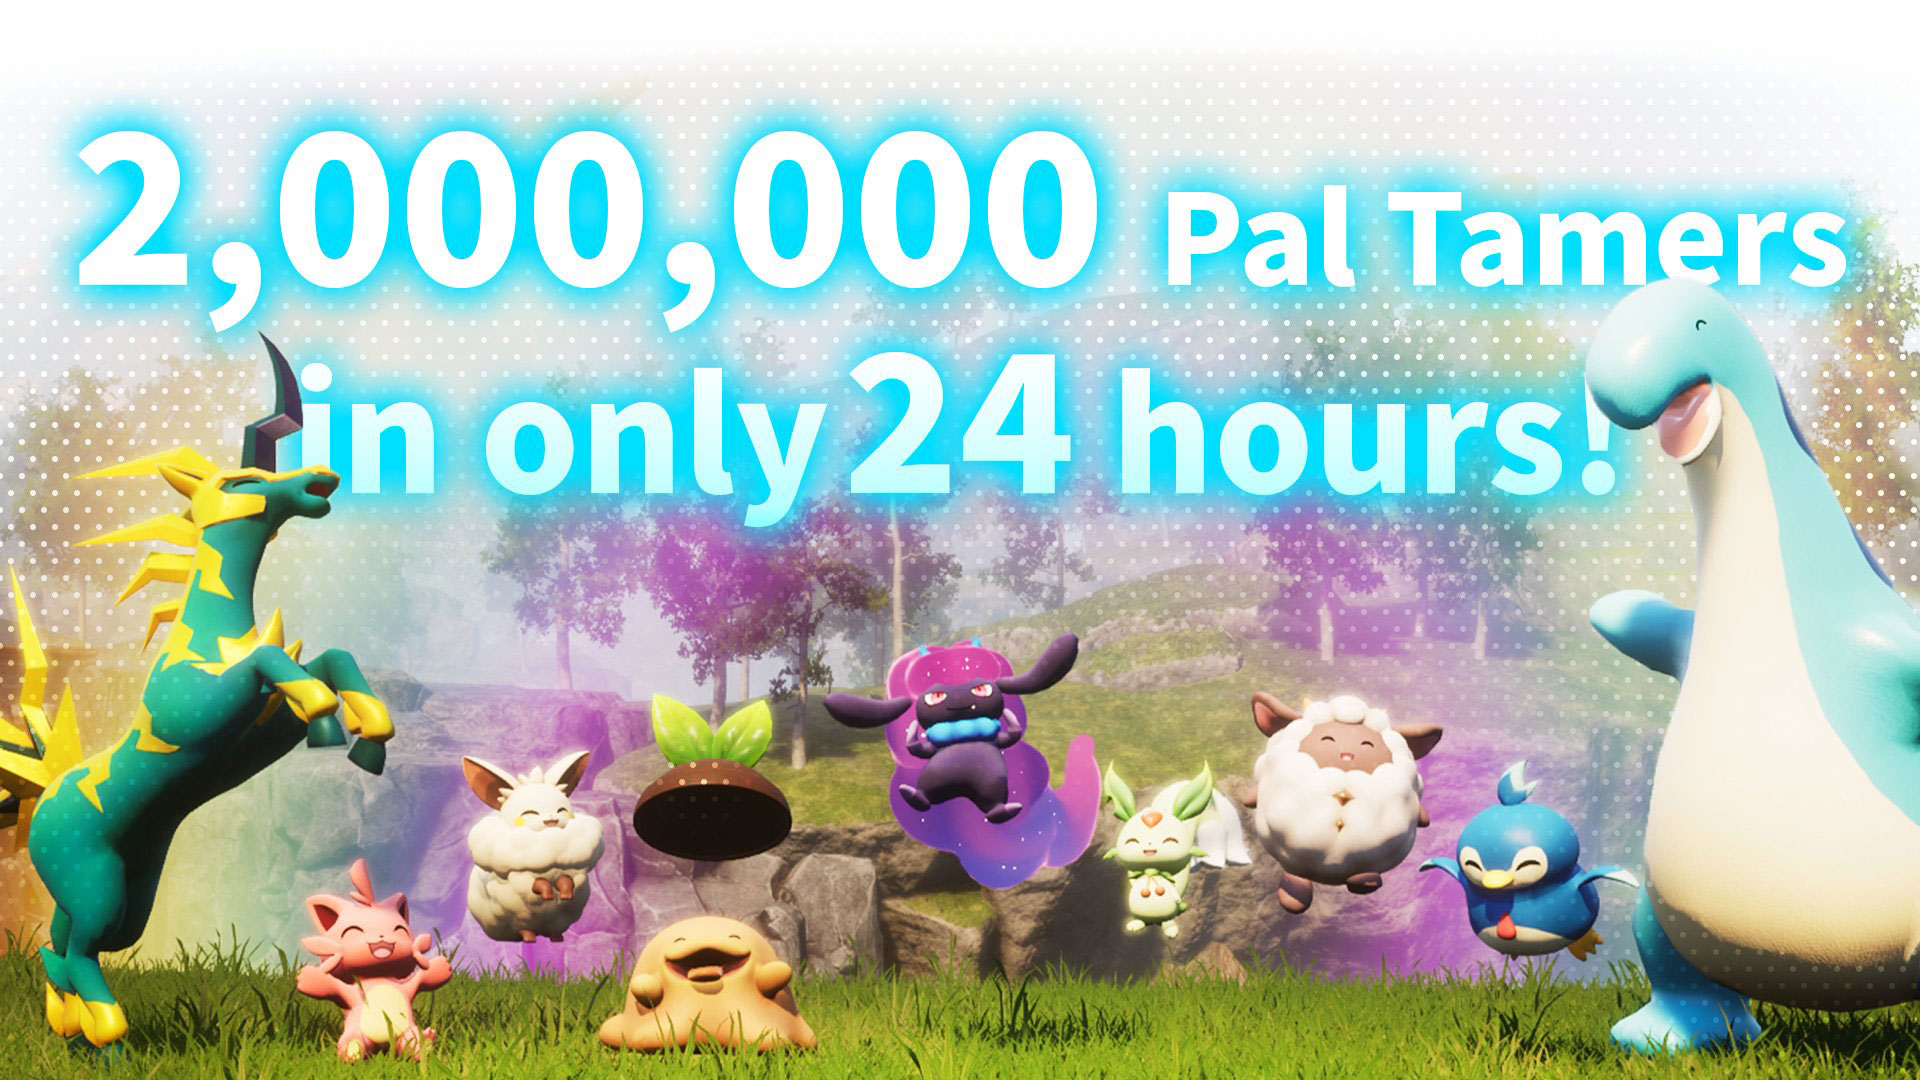 Pocketpair's Palworld has sold over two million copies in 24 hours